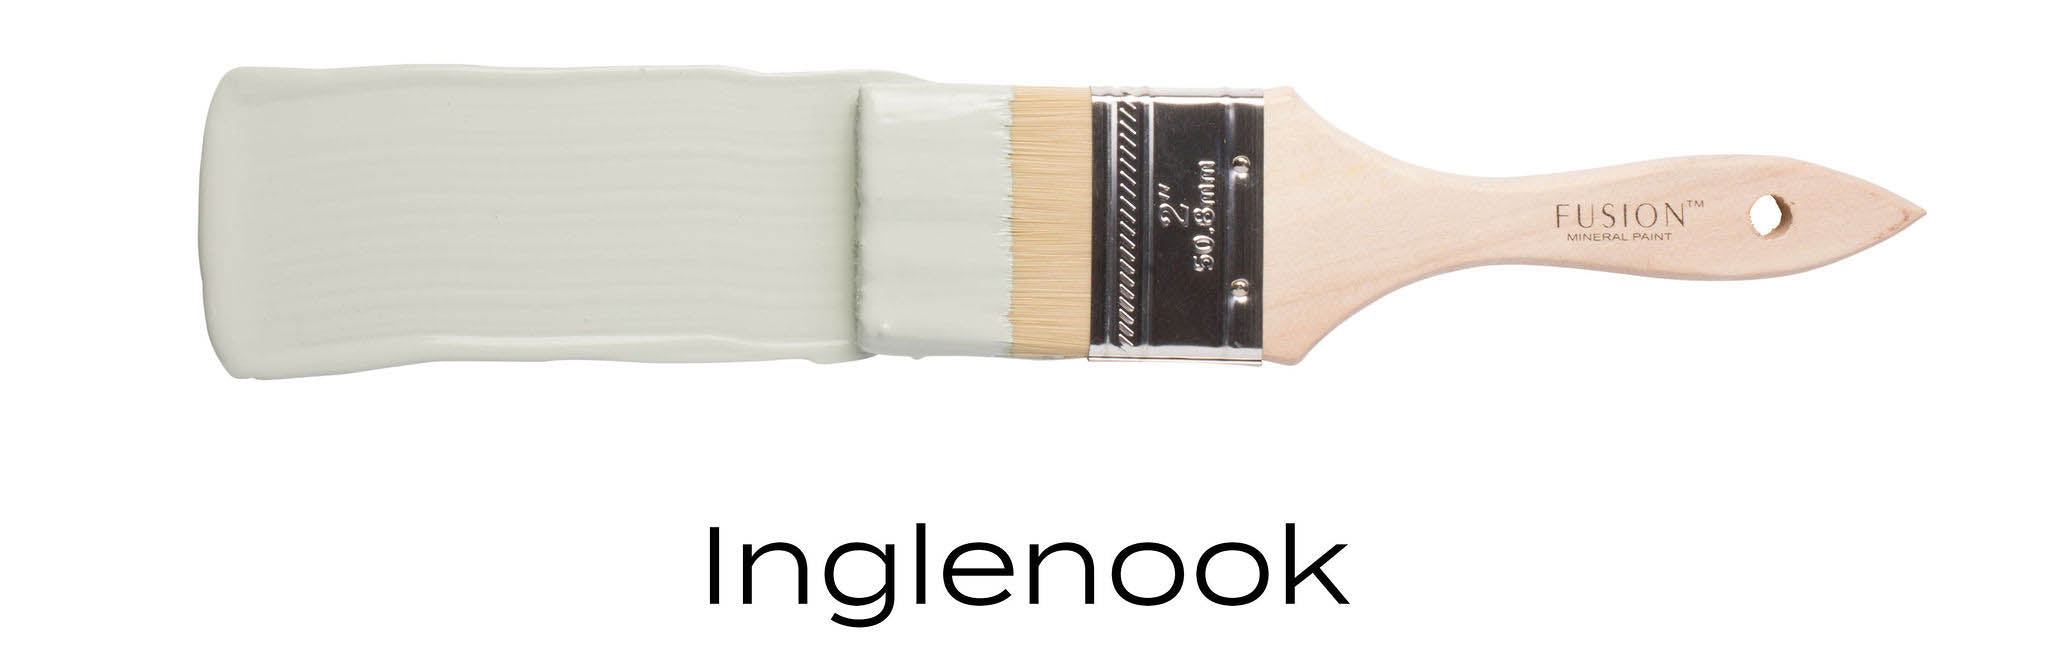 inglenook colour example, light blue furniture fusion mineral paint on paint brush.